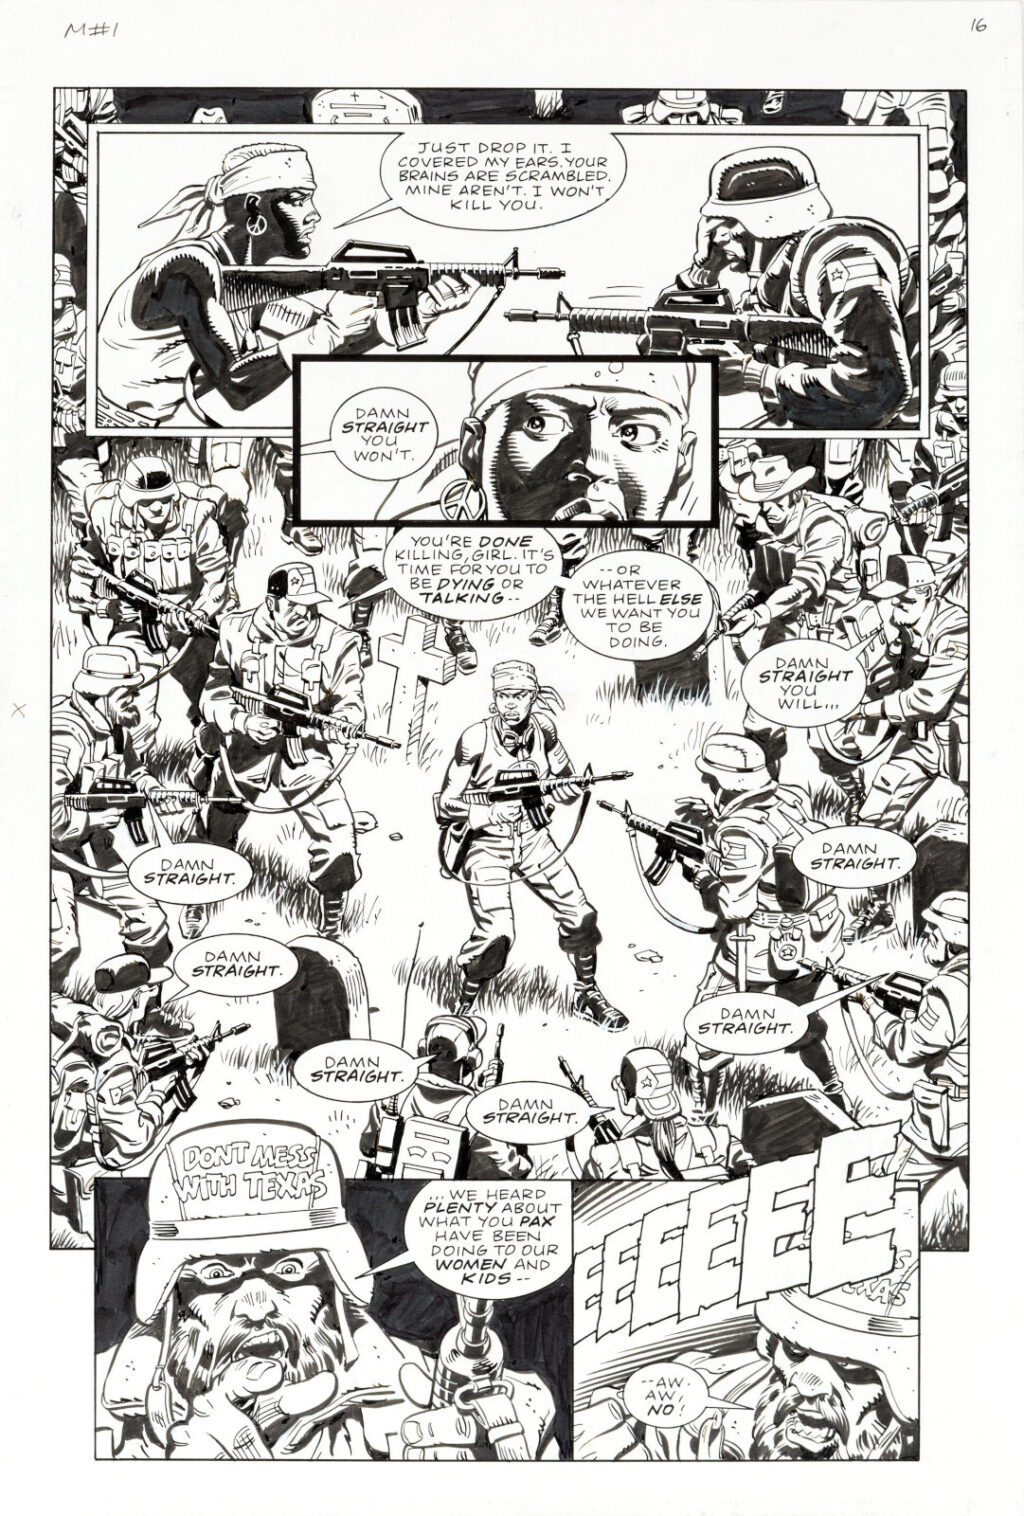 Martha Washington Goes To War issue 1 page 16 by Dave Gibbons